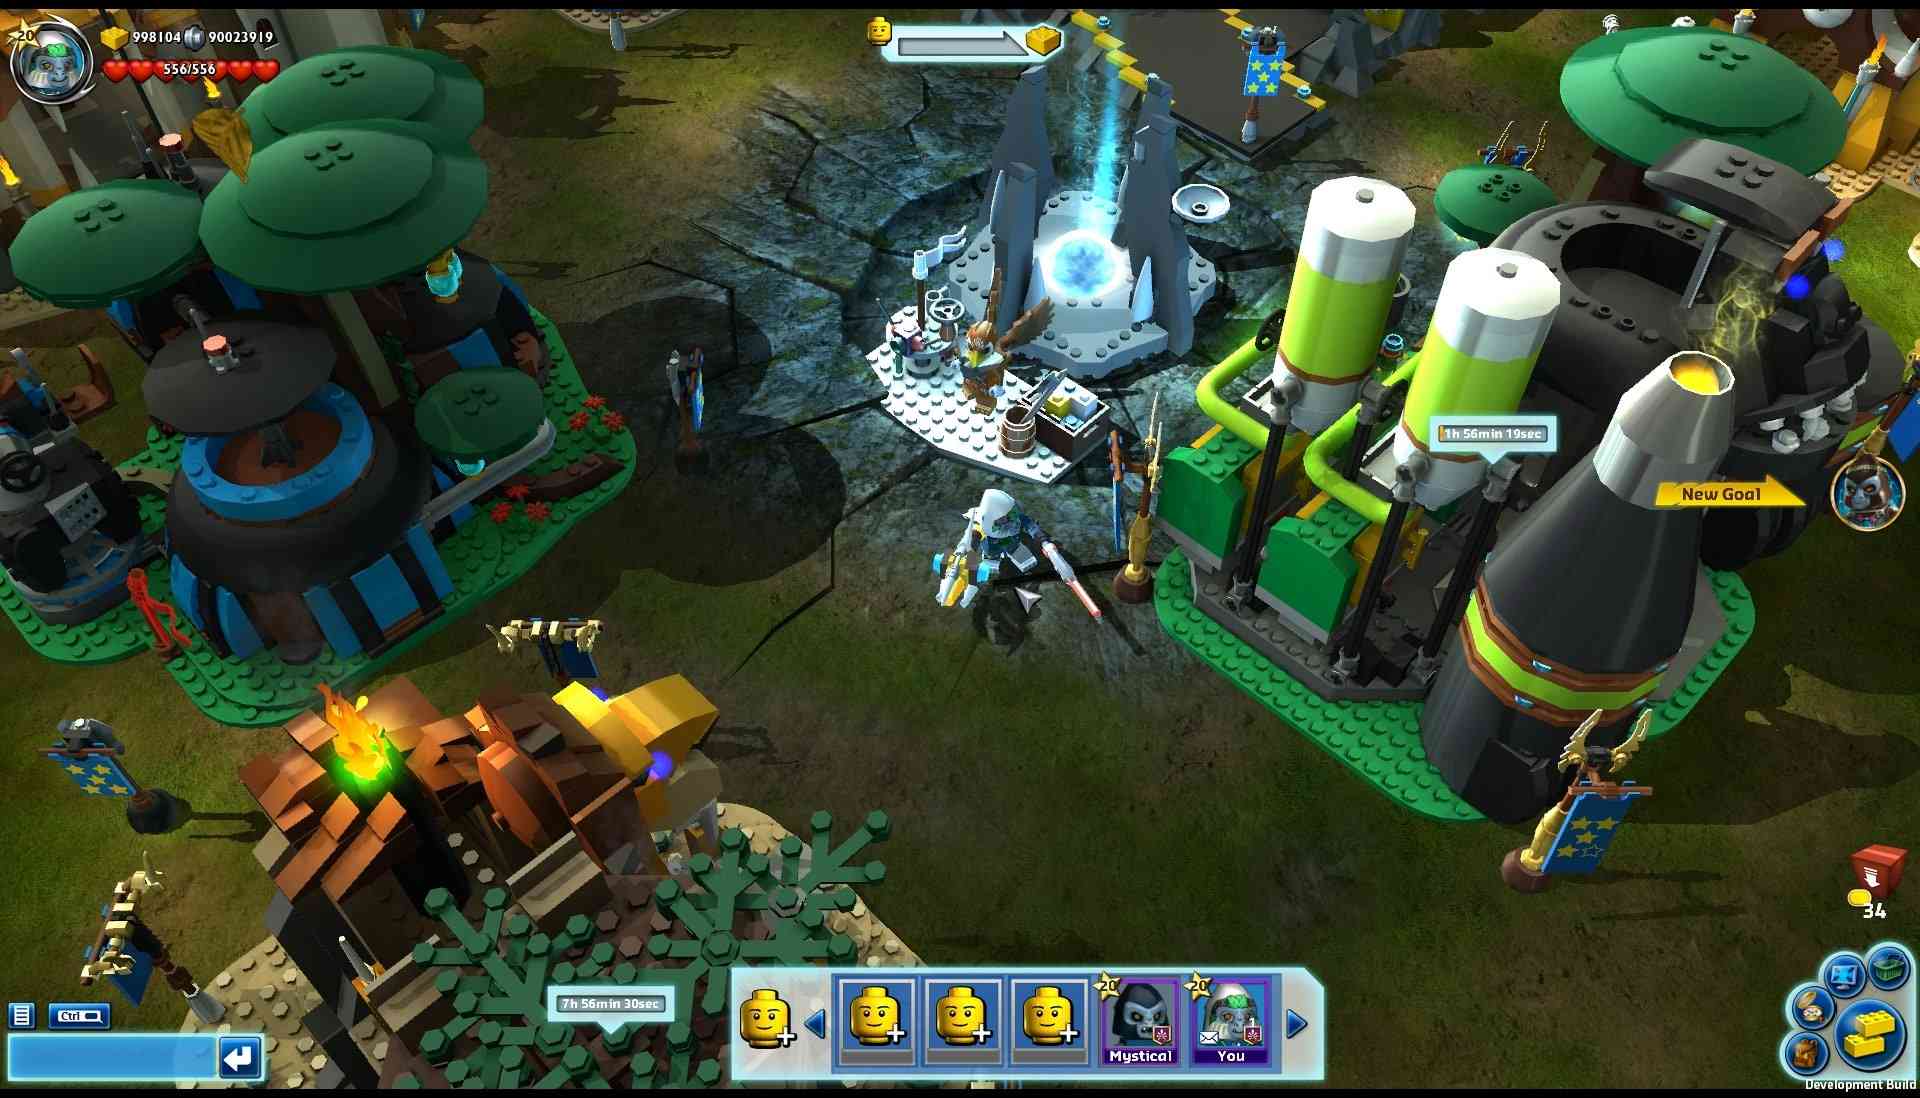 http://canadianonlinegamers.com/wp-content/uploads/2013/08/Lego-Legends-of-Chima-Online-5.jpg